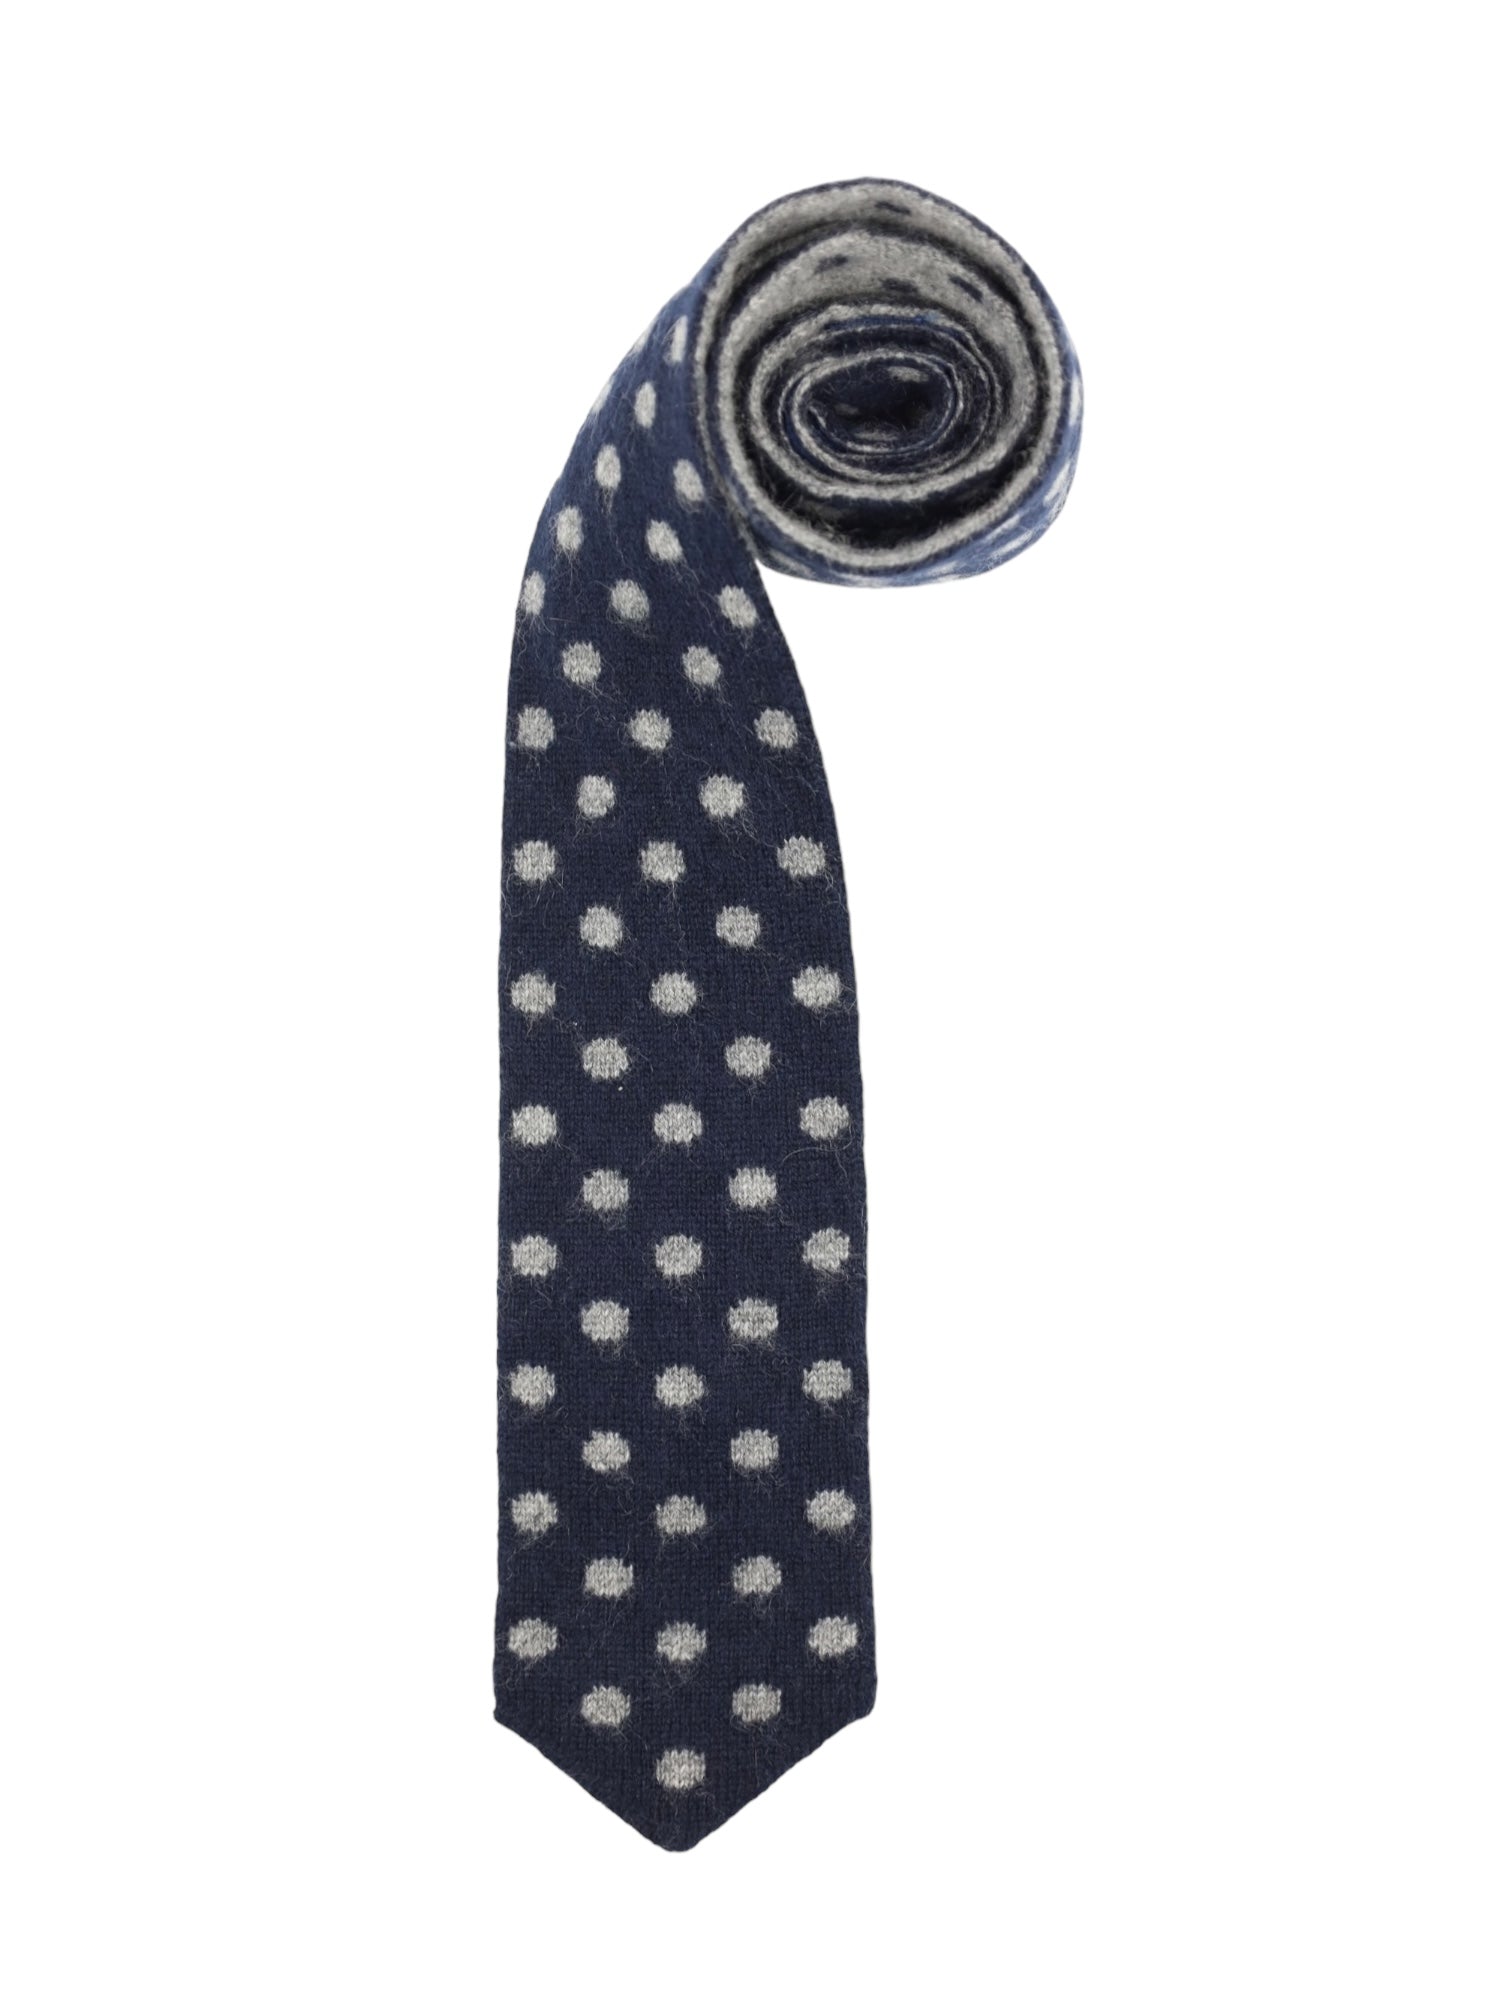 Kiton Blue & Grey Reversible Knitted Cashmere Tie